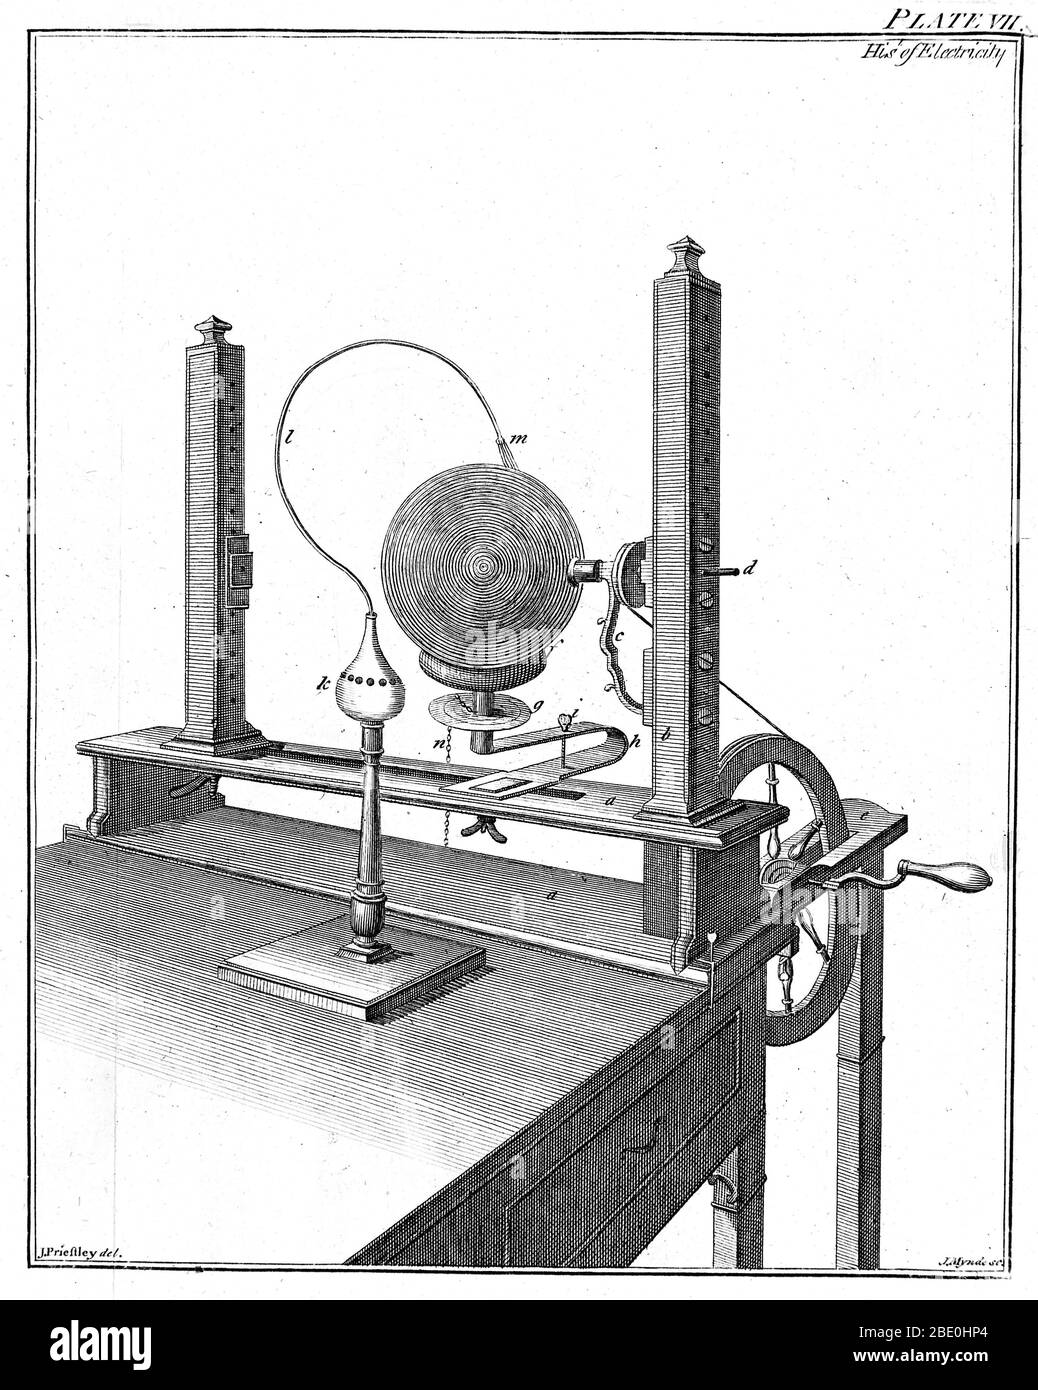 Electrostatic machine used by Joseph Priestley, 1775. The glass globe (upper right) was rotated by the handle against a fixed 'rubber' (such as fur) and the charge collected by wires (top right) sweeping the globe. The voltage was soon high enough to spark across the gap (upper left). Joseph Priestley (1733-1804) was an English chemist. His most famous scientific research was on the nature and properties of gases. By clever design of apparatus and careful manipulation, Priestley isolated and characterized eight gases, including oxygen, and out of this work emerged his most important scientific Stock Photo